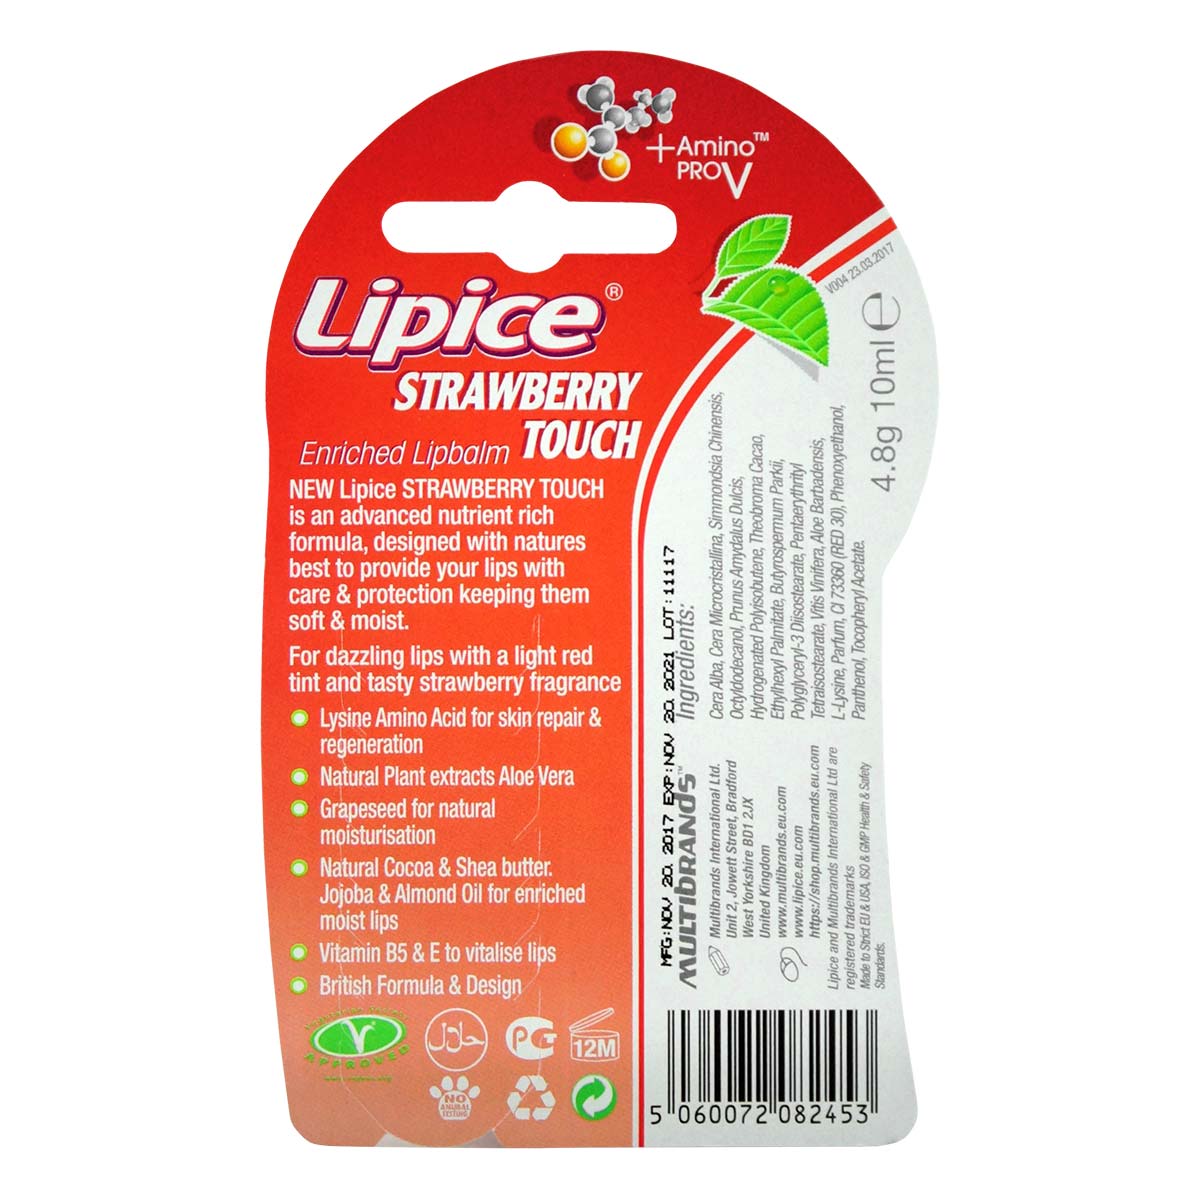 Lipice Strawberry Touch enriched Lipbalm 10ml-p_3